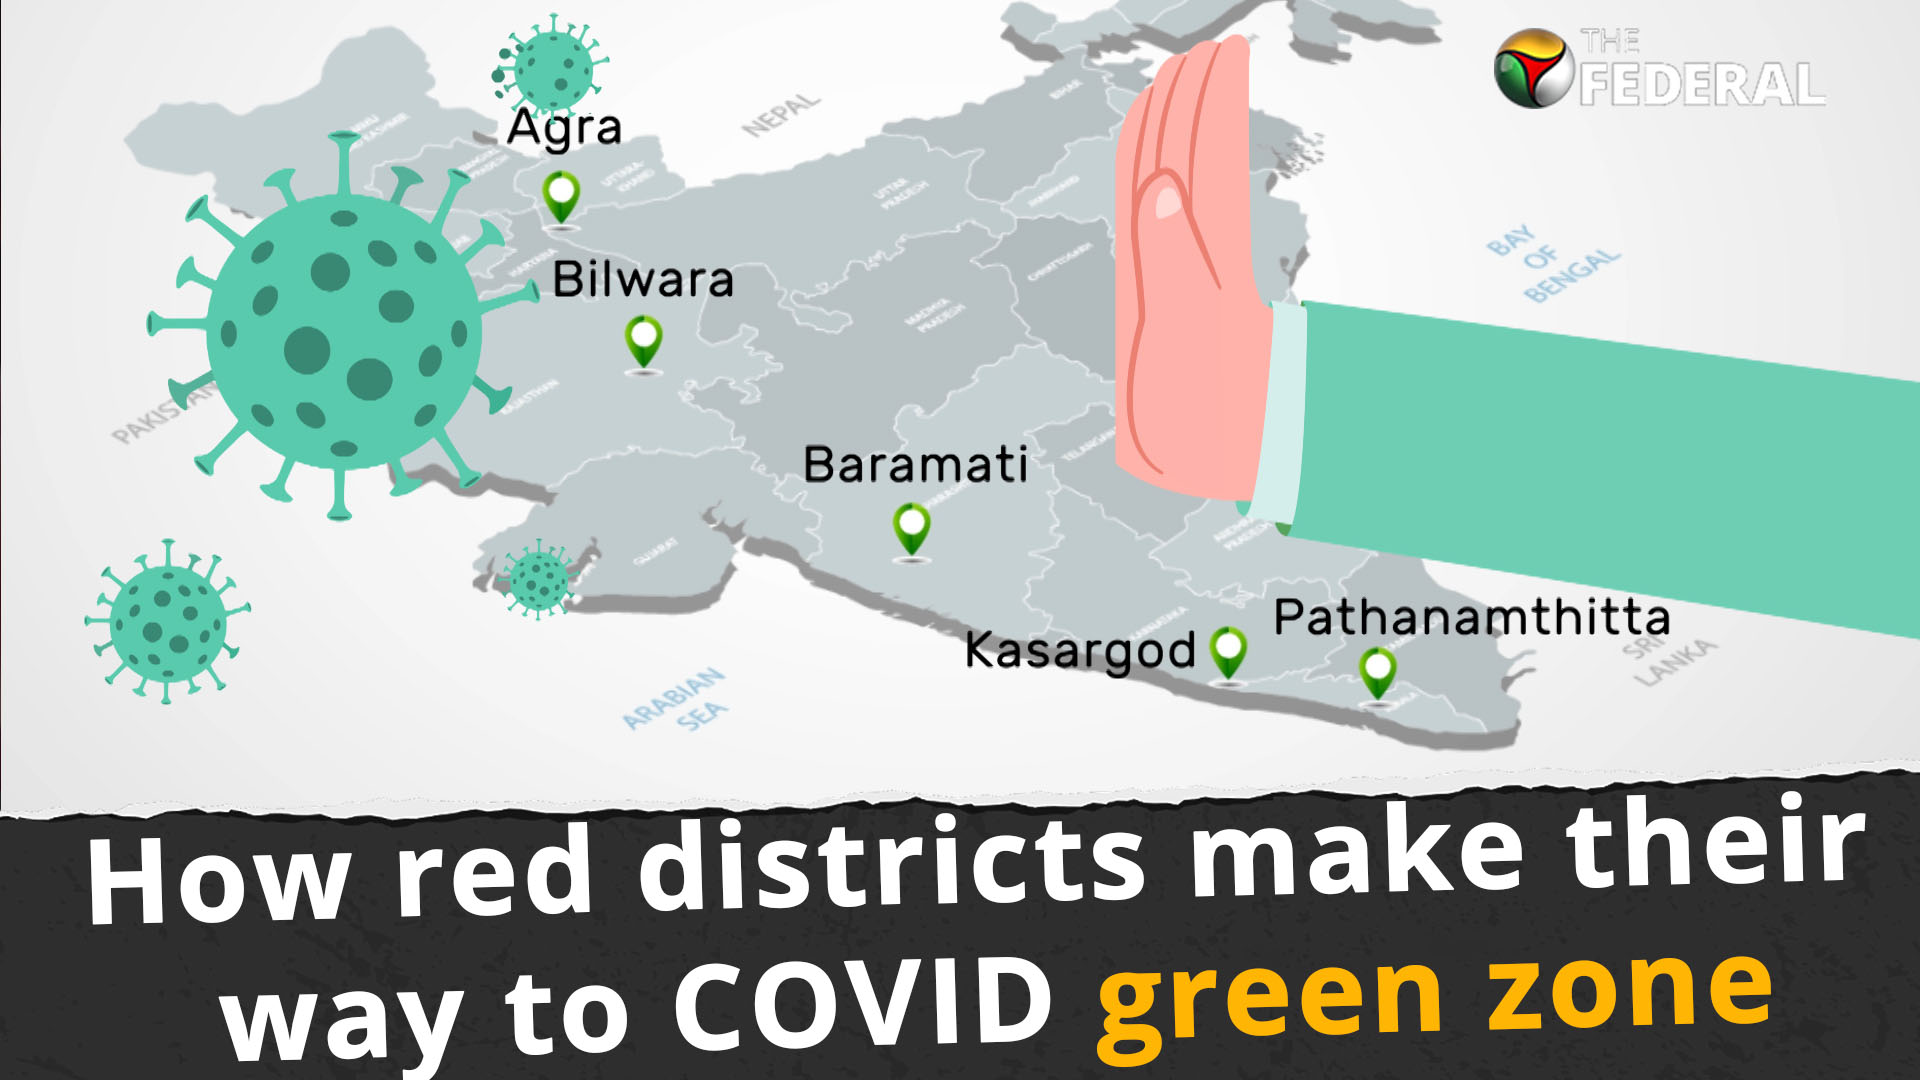 How red districts make their way to COVID green zone